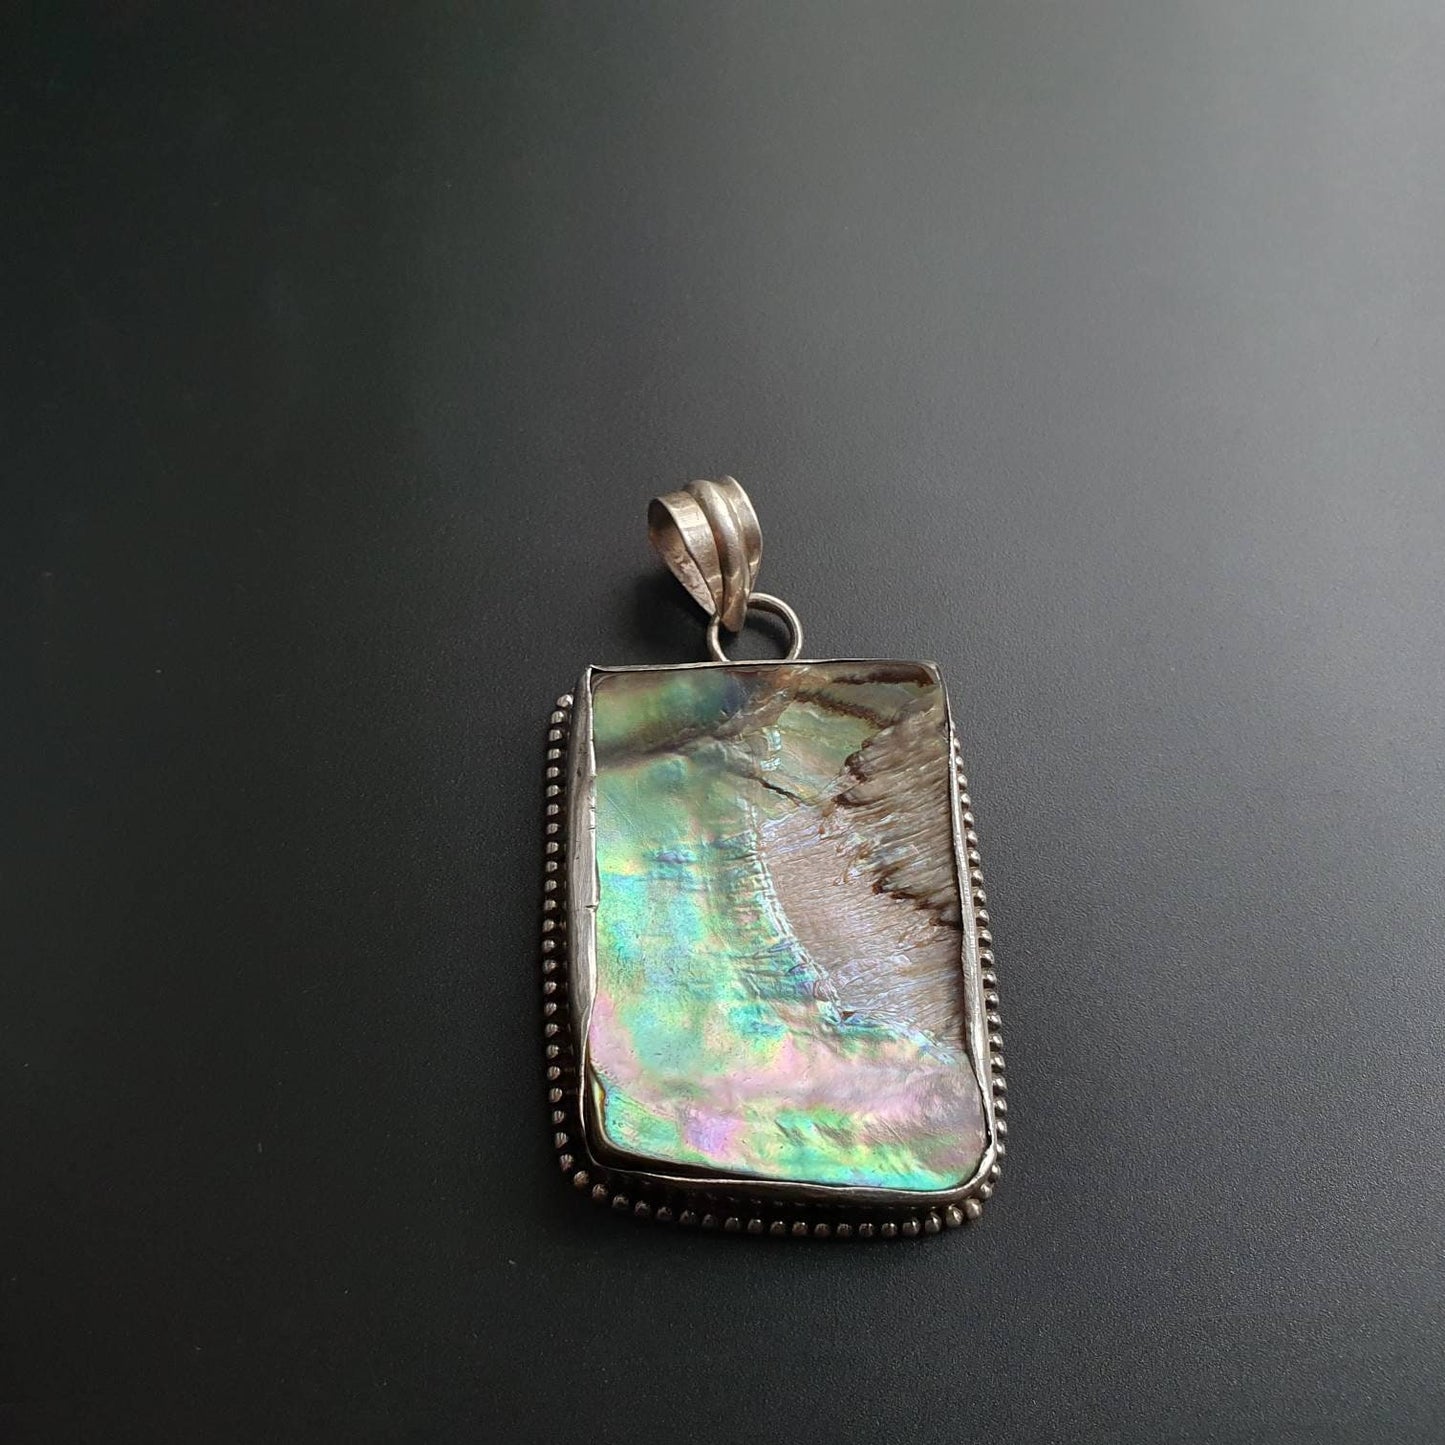 Statement pendant, sterling silver pendant, necklace, gifts, chunky pendant, mother of pearl, gifts, unique jewelry, handmade, vintage